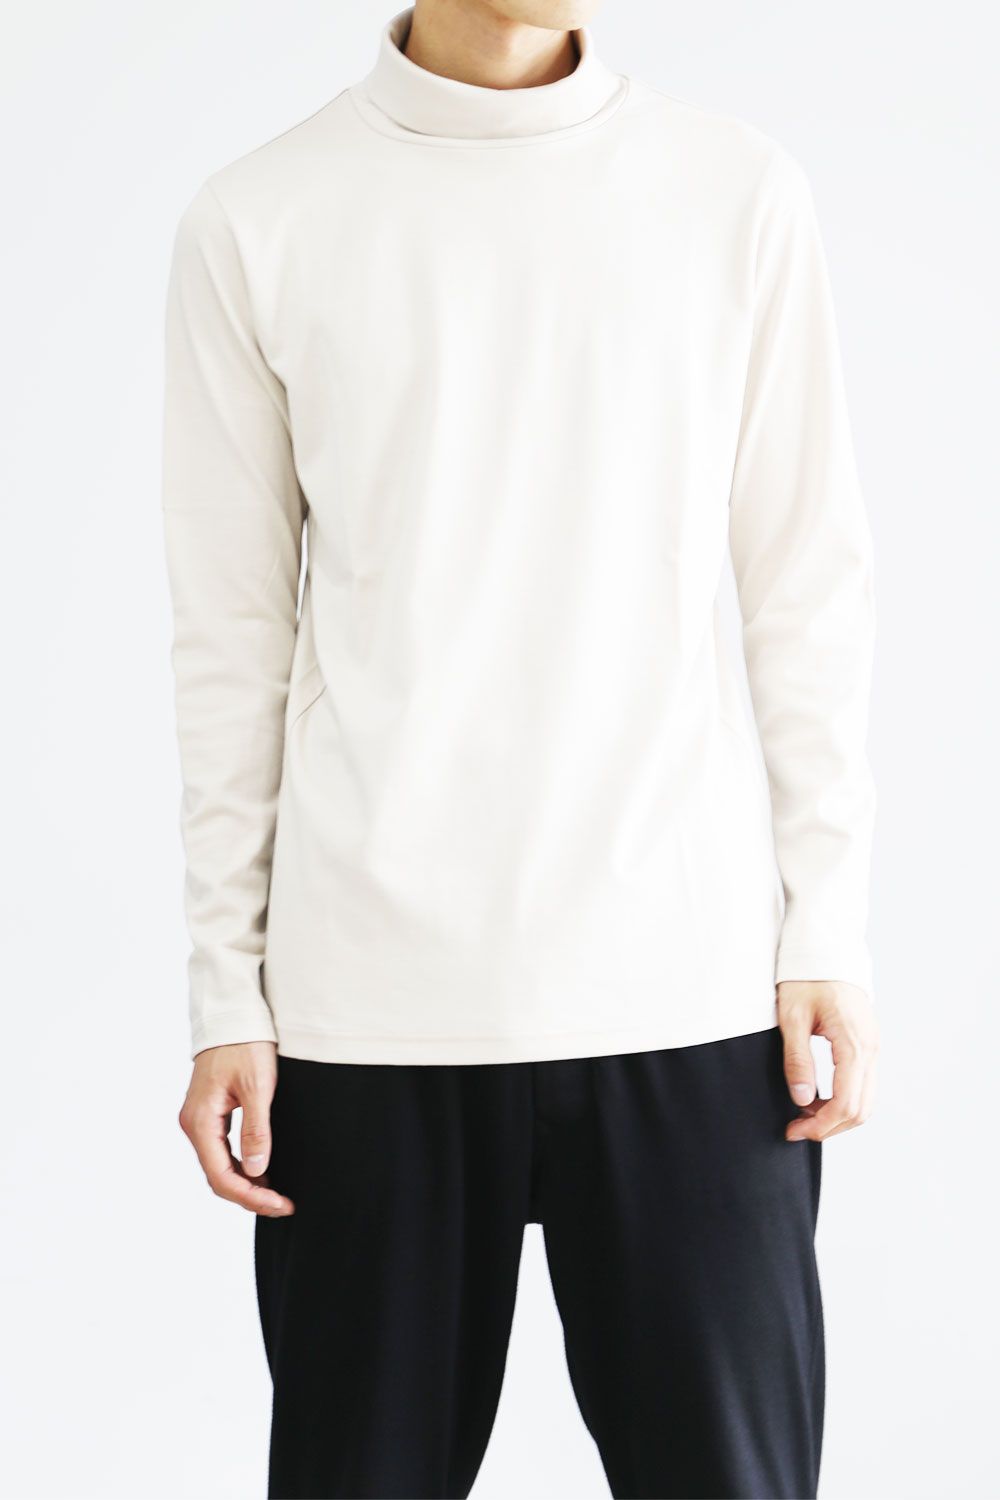 ATTACHMENT - SUVIN COTTON SMOOTH HIGH NECKED T